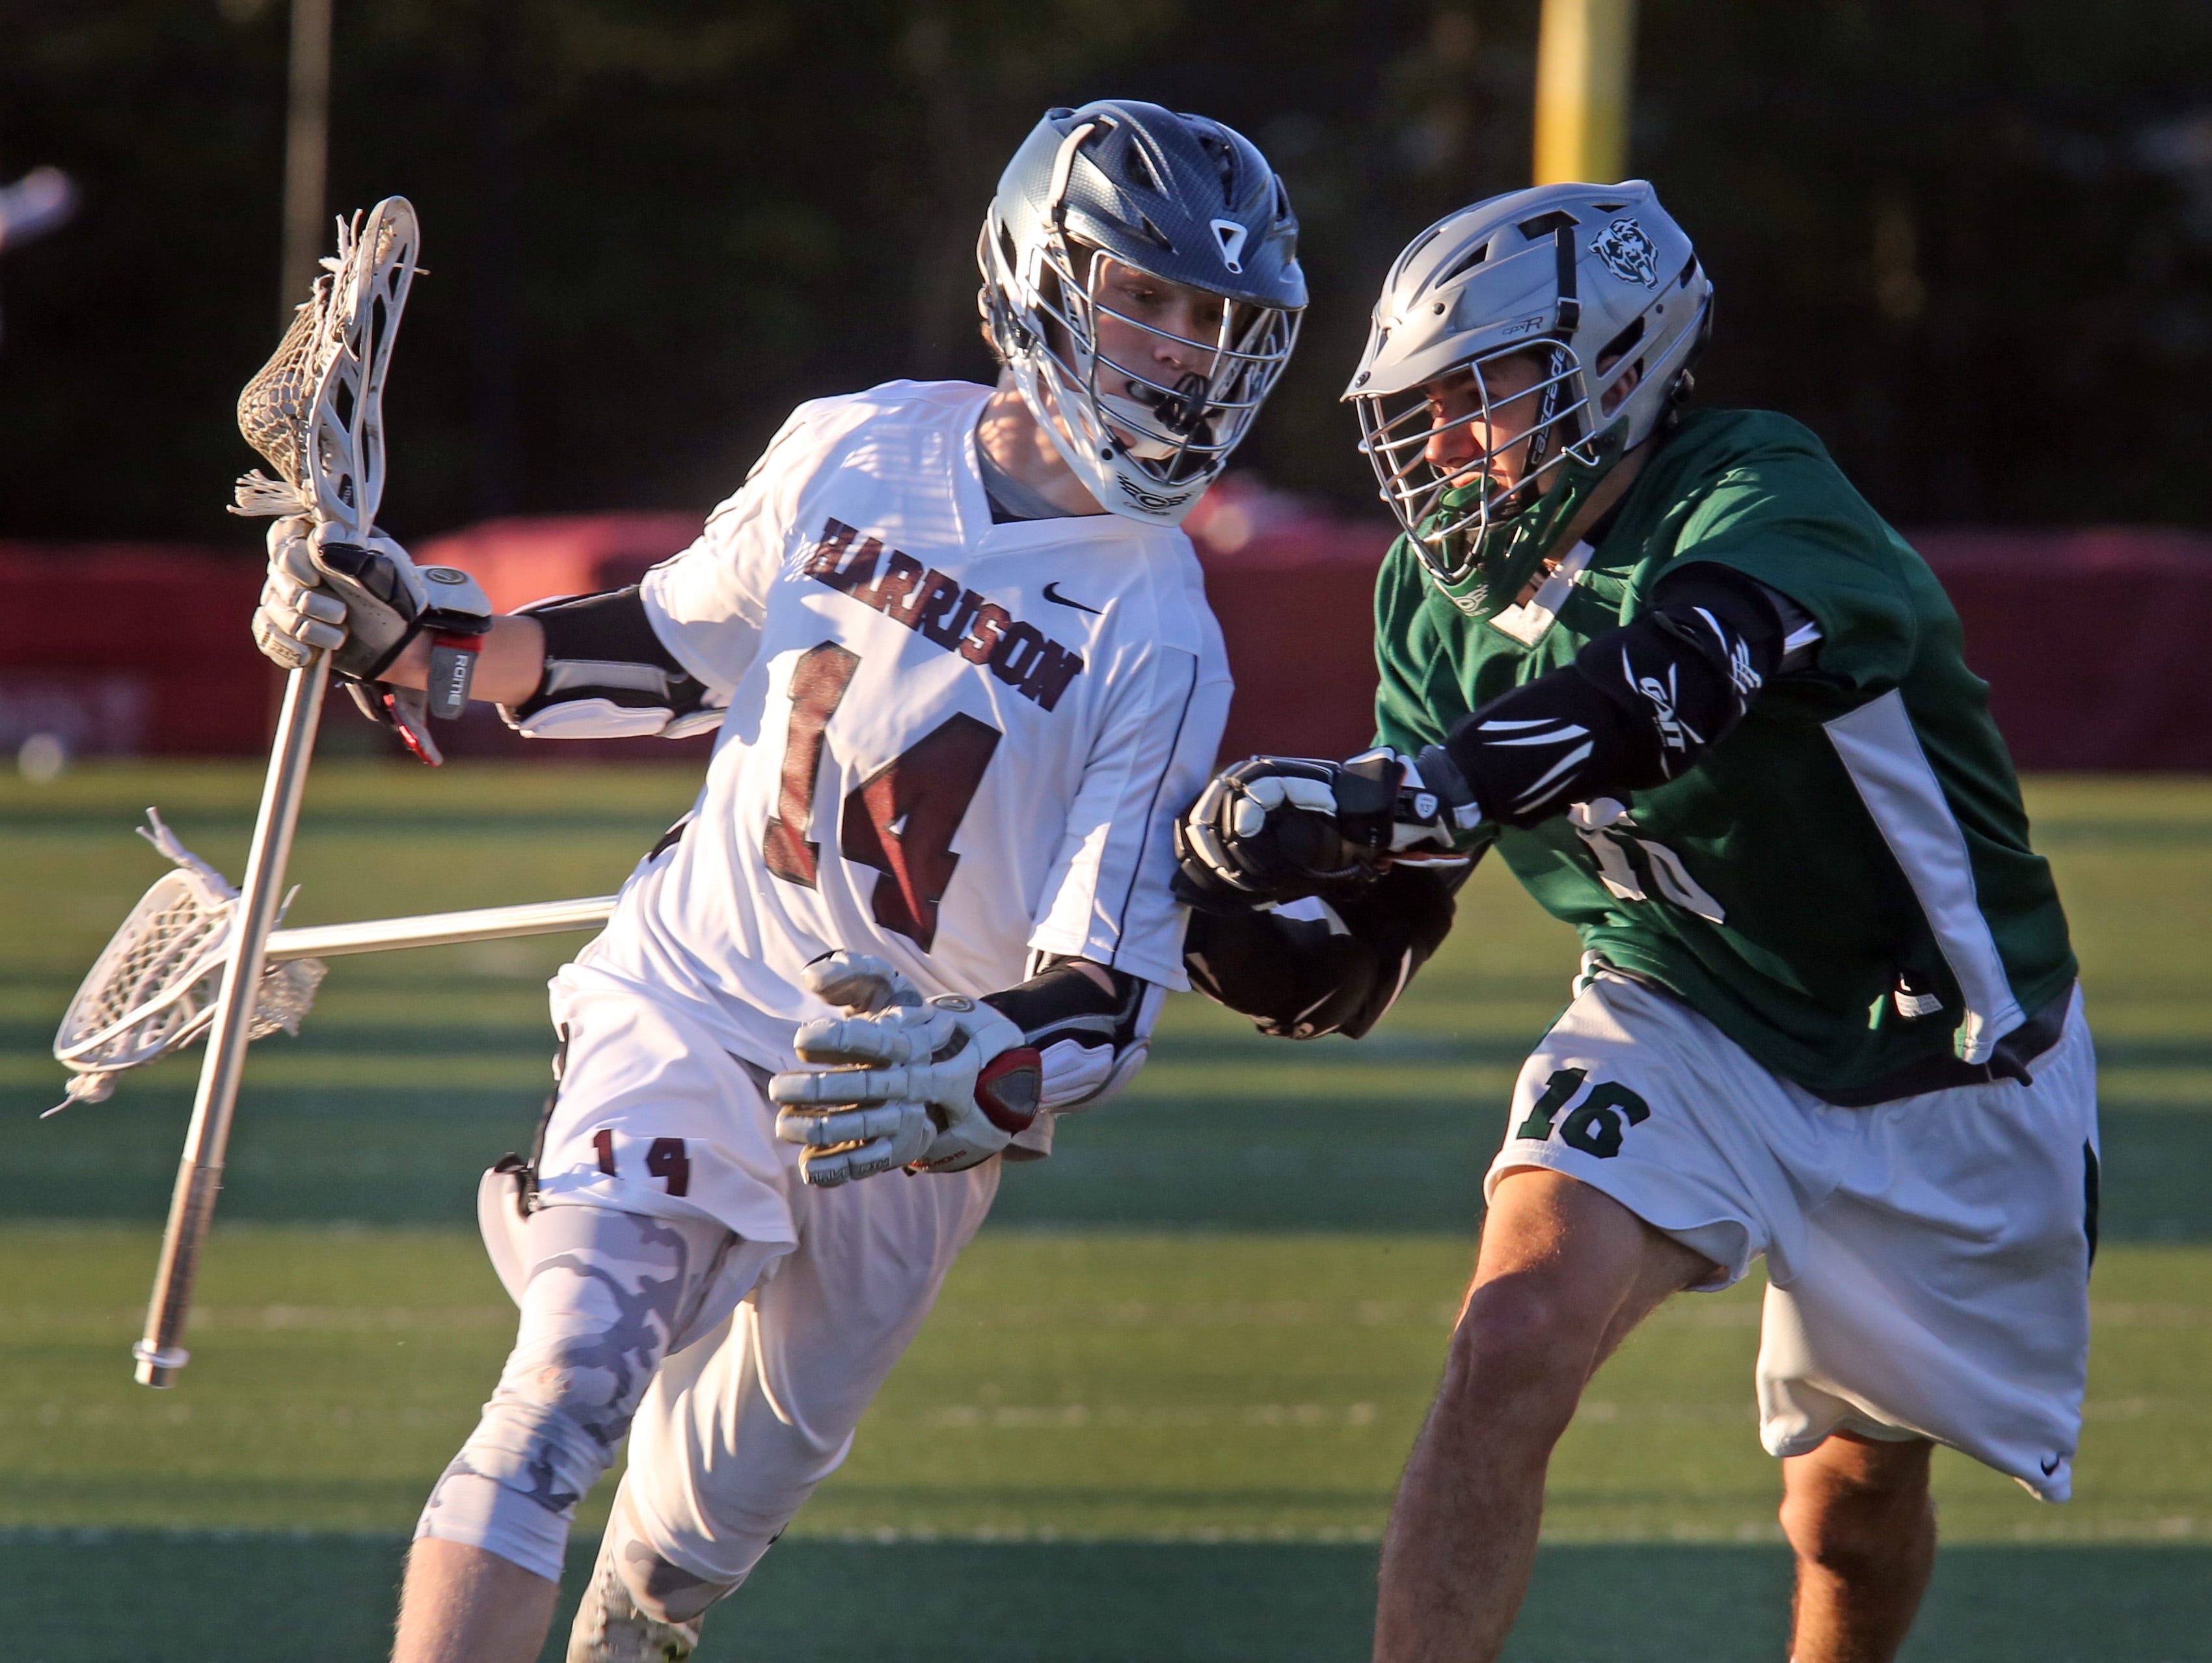 Brewster's Martin Saijanin (16) guards Harrison's Matt McLaughlin (14) during boys lacrosse Section 1 Class B playoff game at Harrison High School on May 16, 2016.